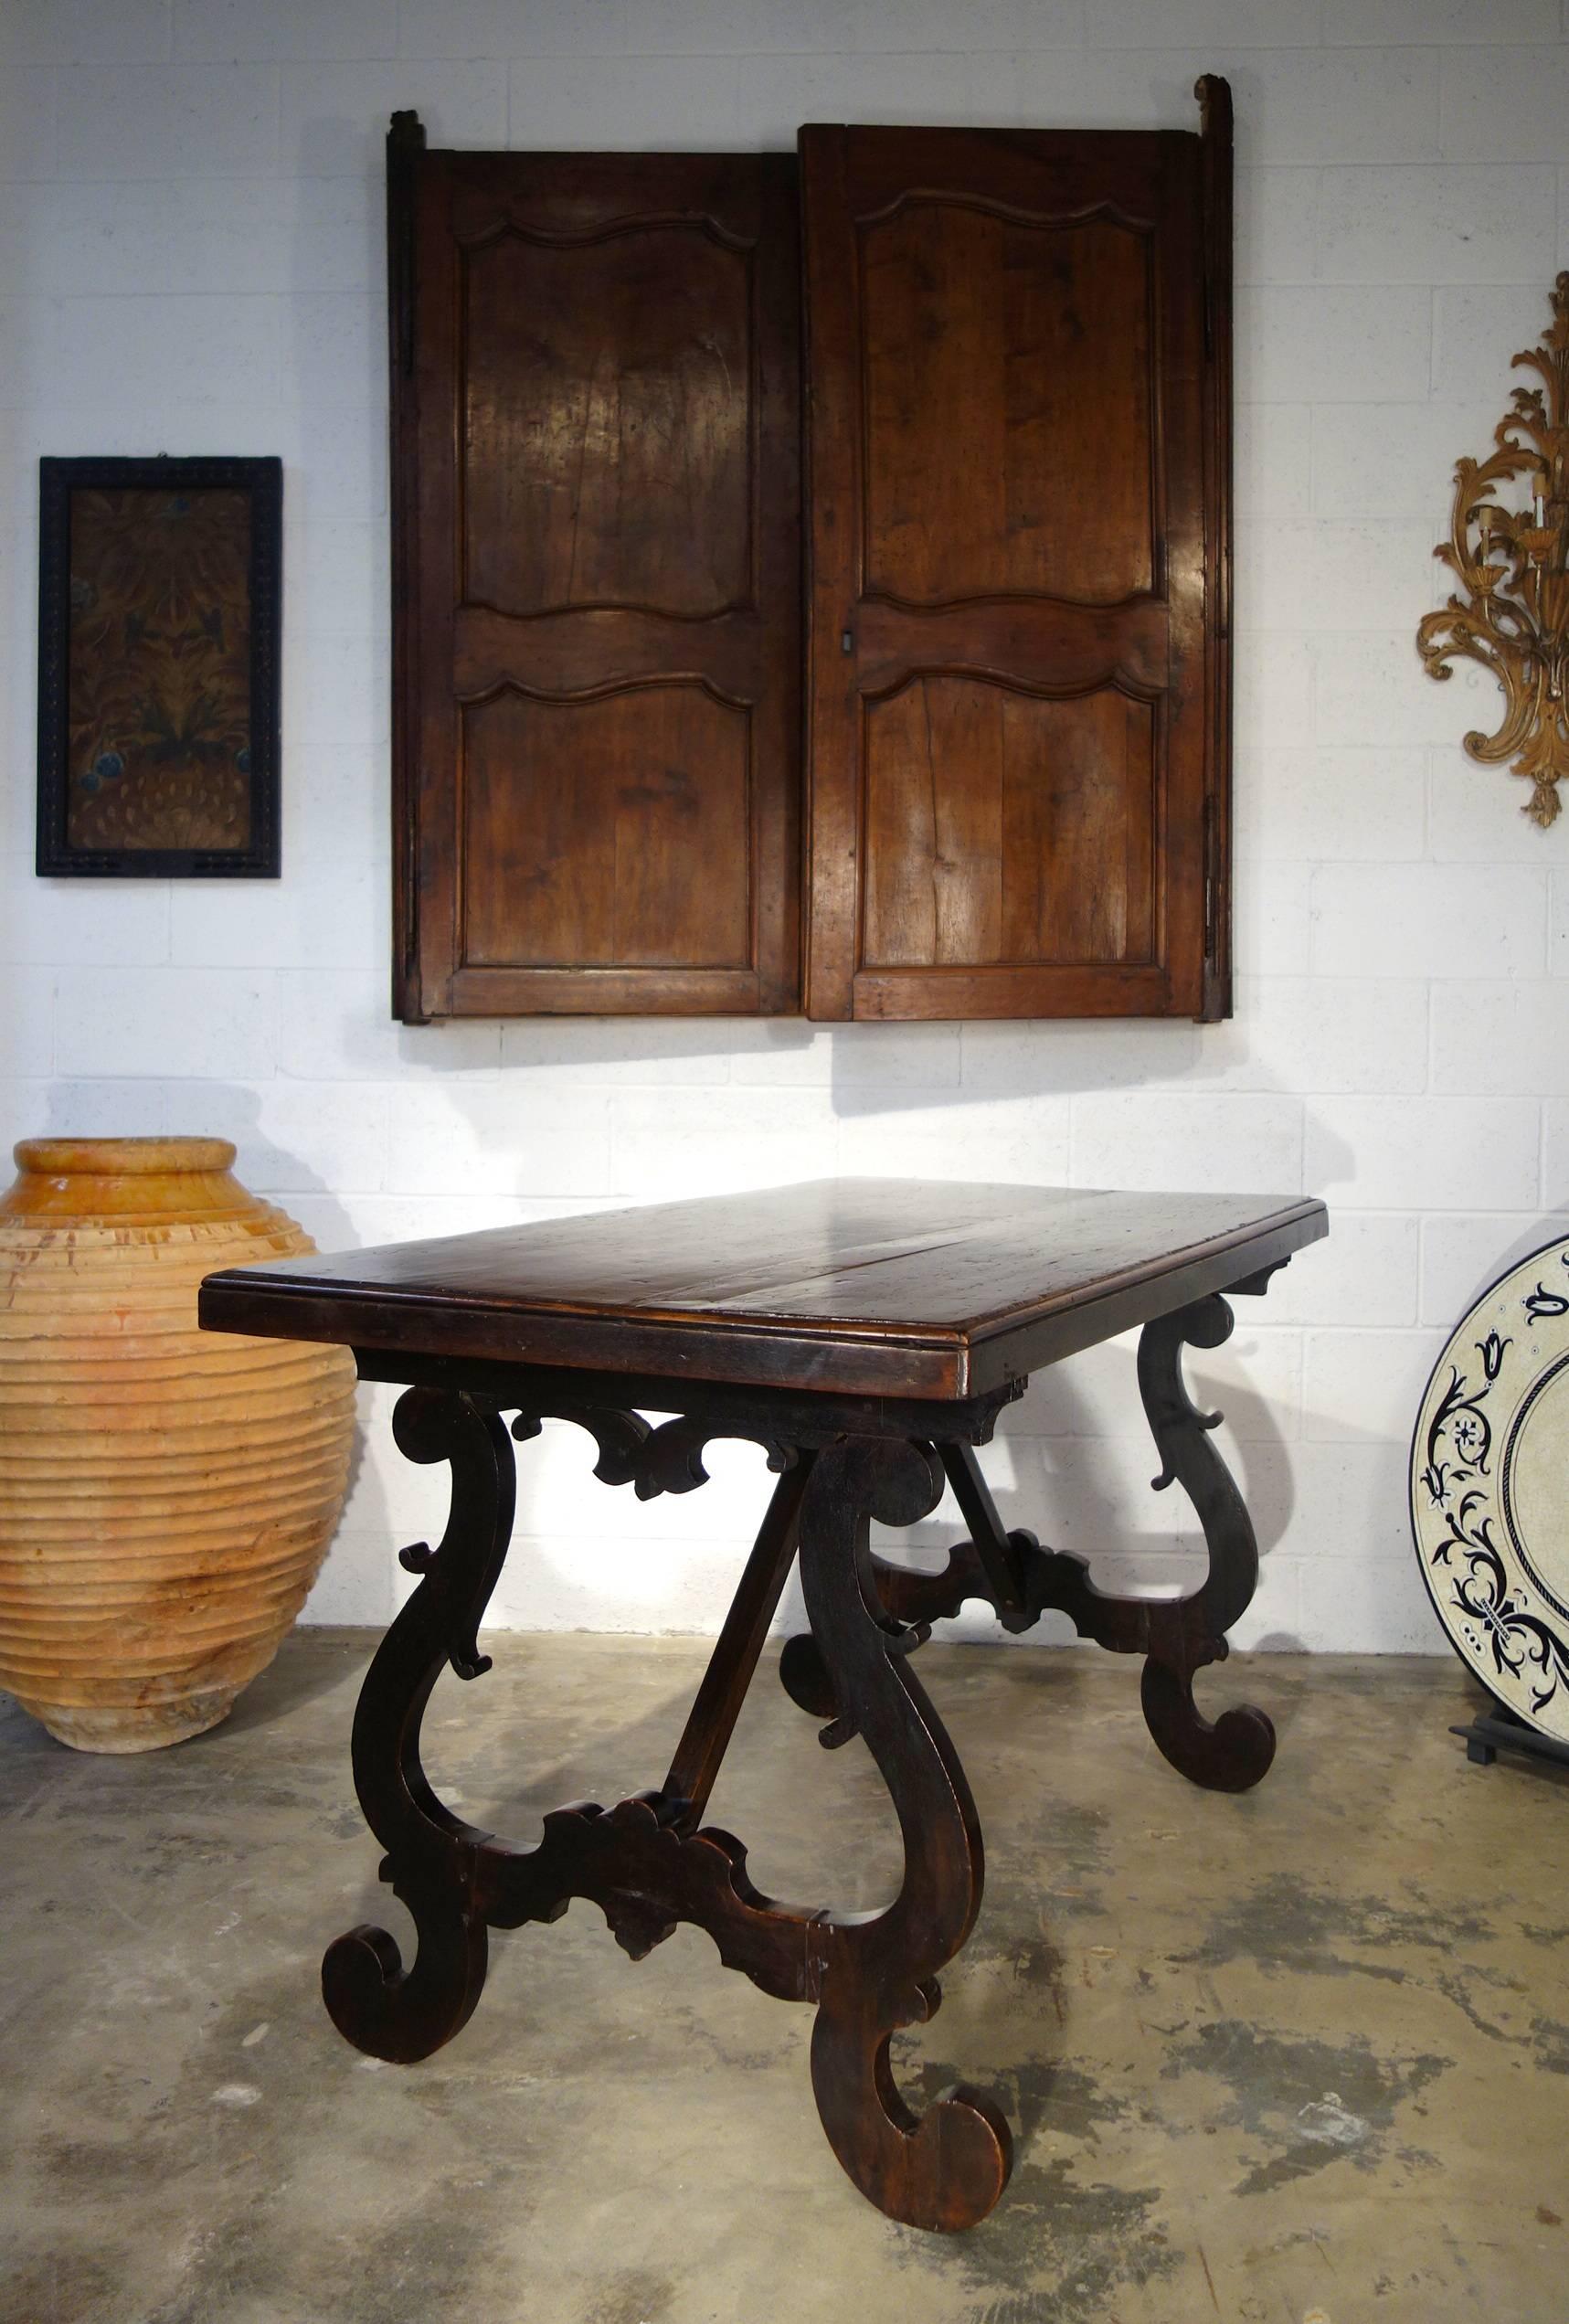 Very old Tuscan solid walnut table top, two planks from the 17th century, with a refectory style base of lyre legs and crossbar supports, 19th century.
Simple dramatic clean lines. 

Measures: 60.5" L x 31.25" D x 33.75" H.